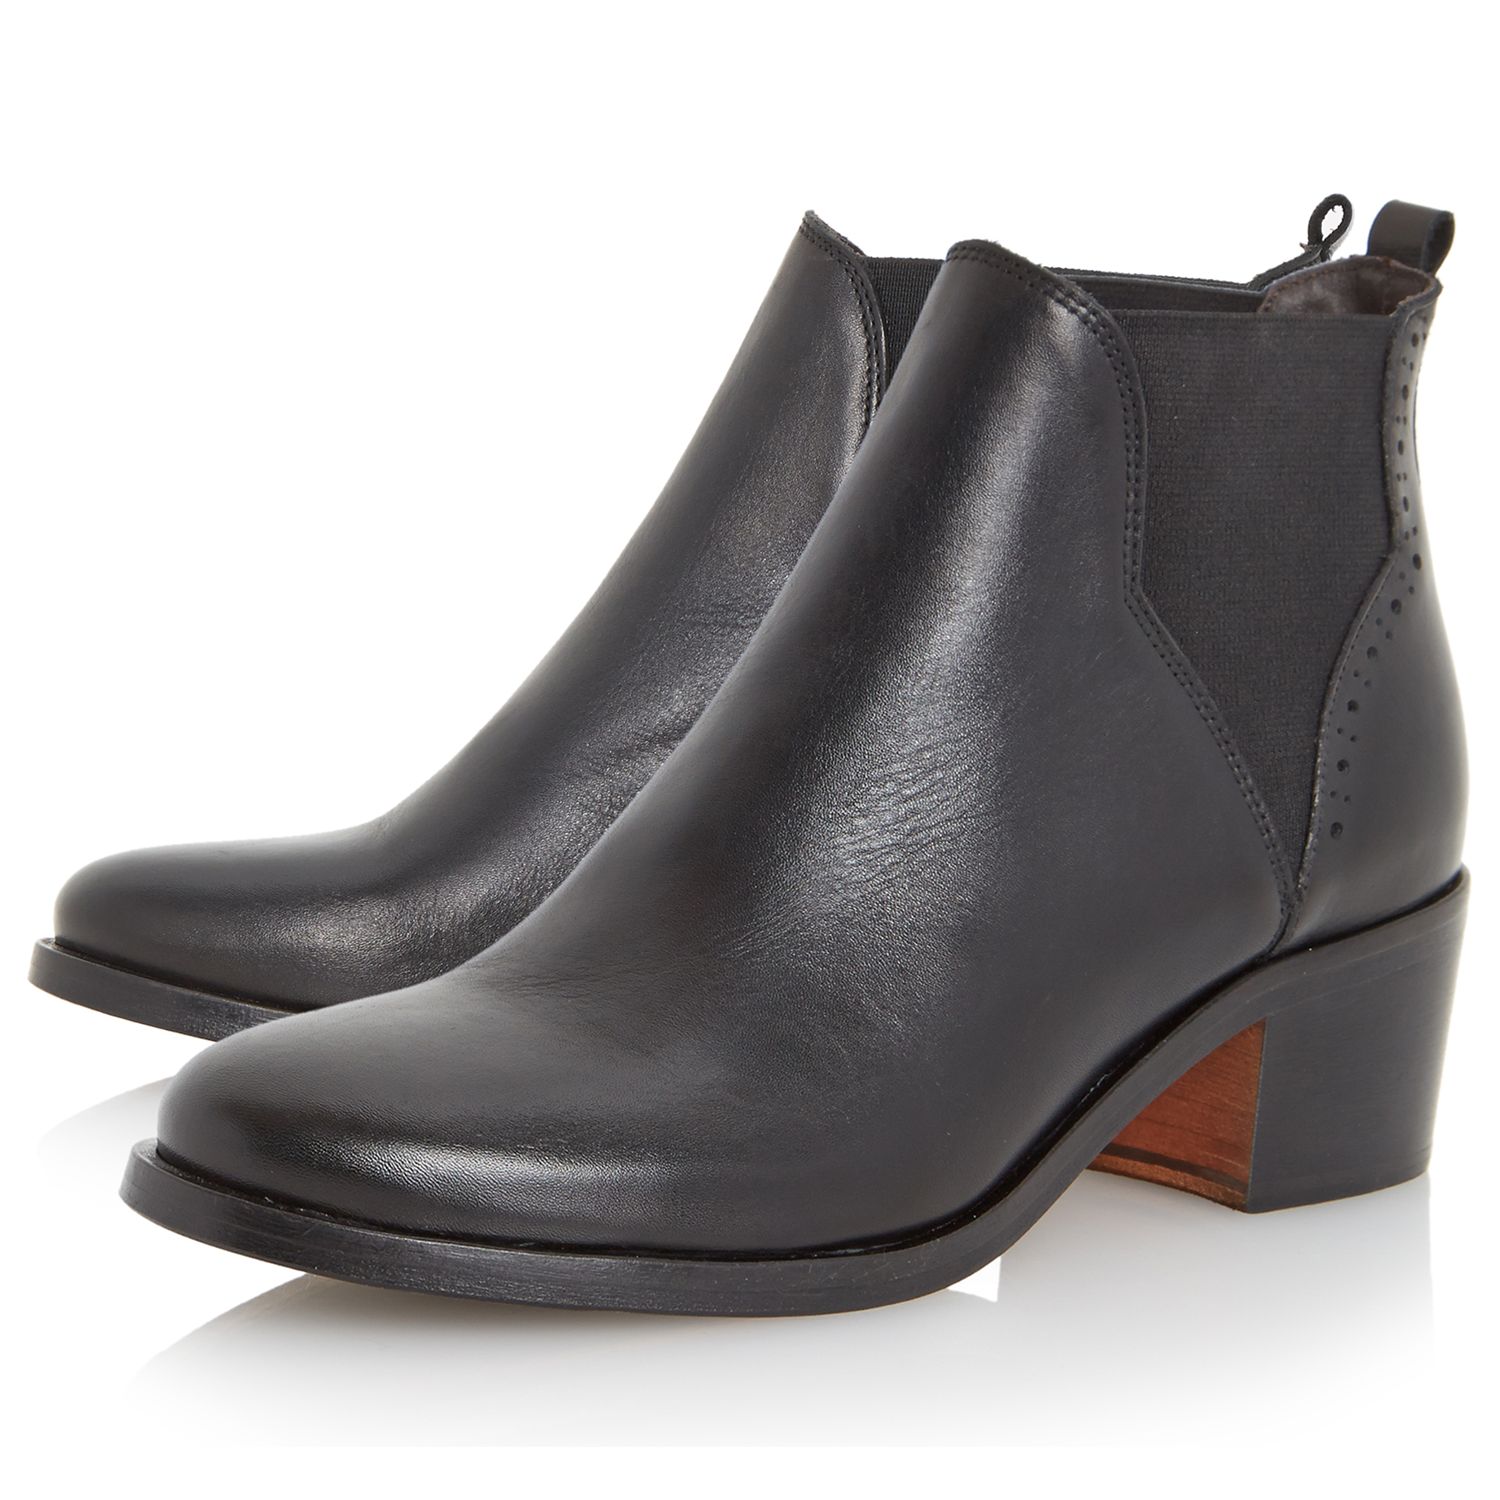 Dune Parnell Block Heeled Ankle Chelsea Boots at John Lewis & Partners